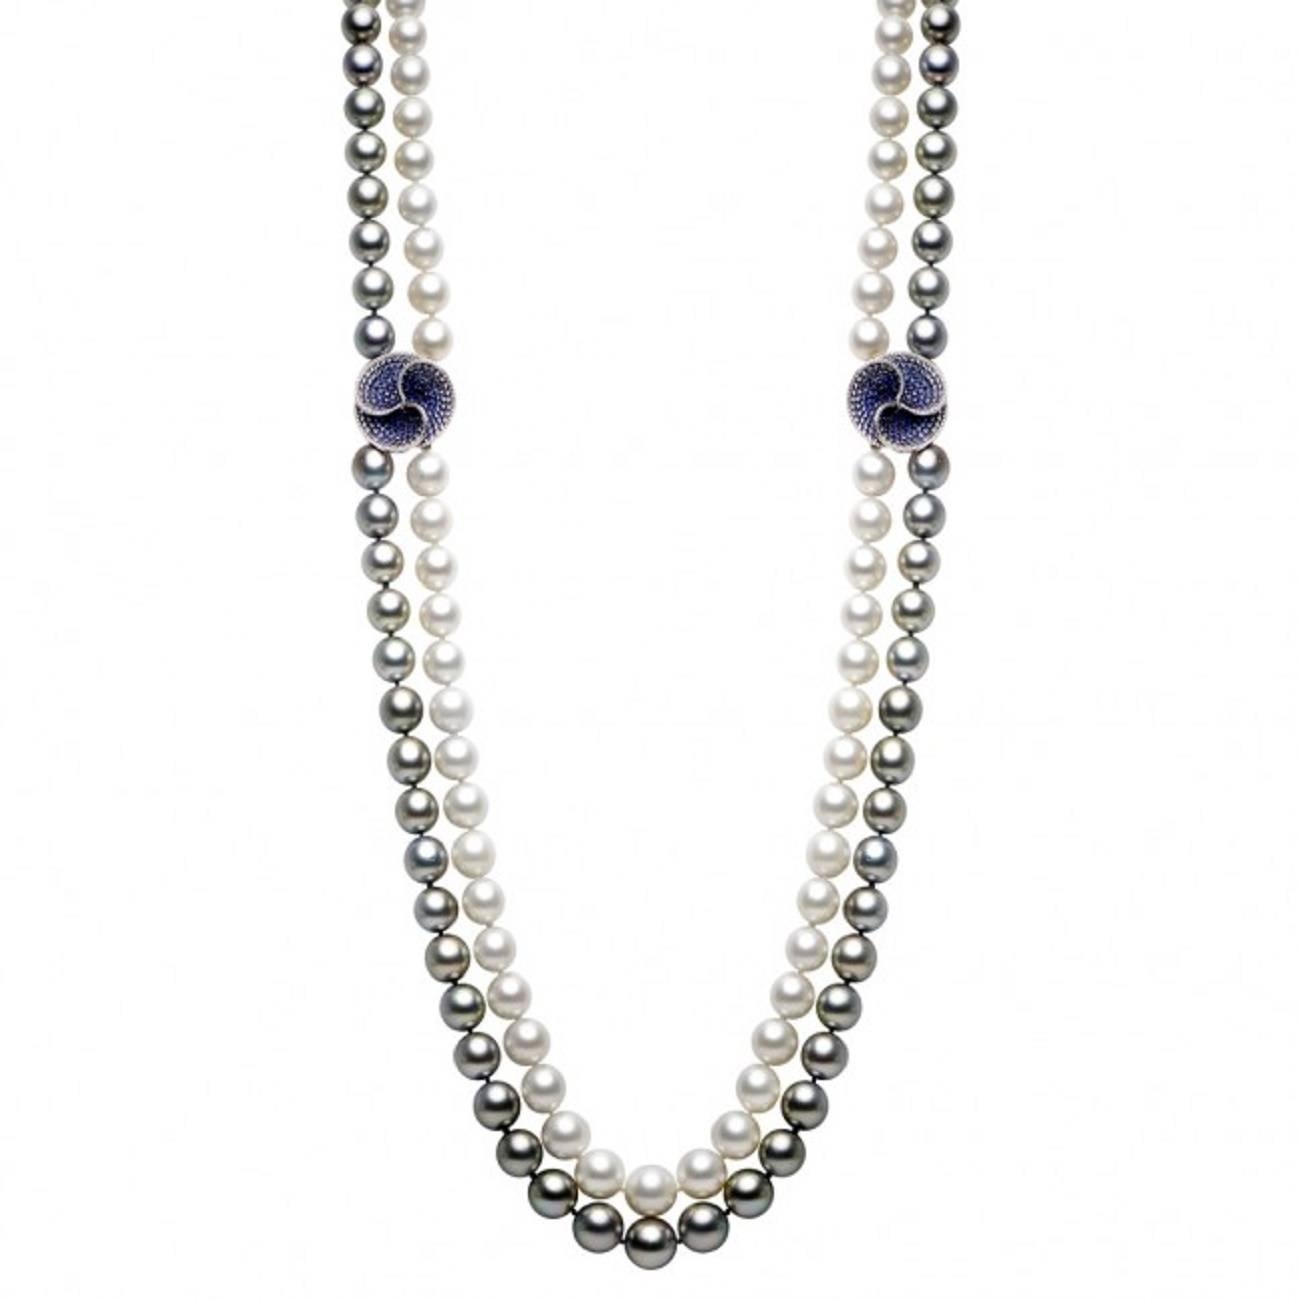 Contemporary Unique tahitian and South Sea  Pearl Necklace with Blue and White Ombre Flowers